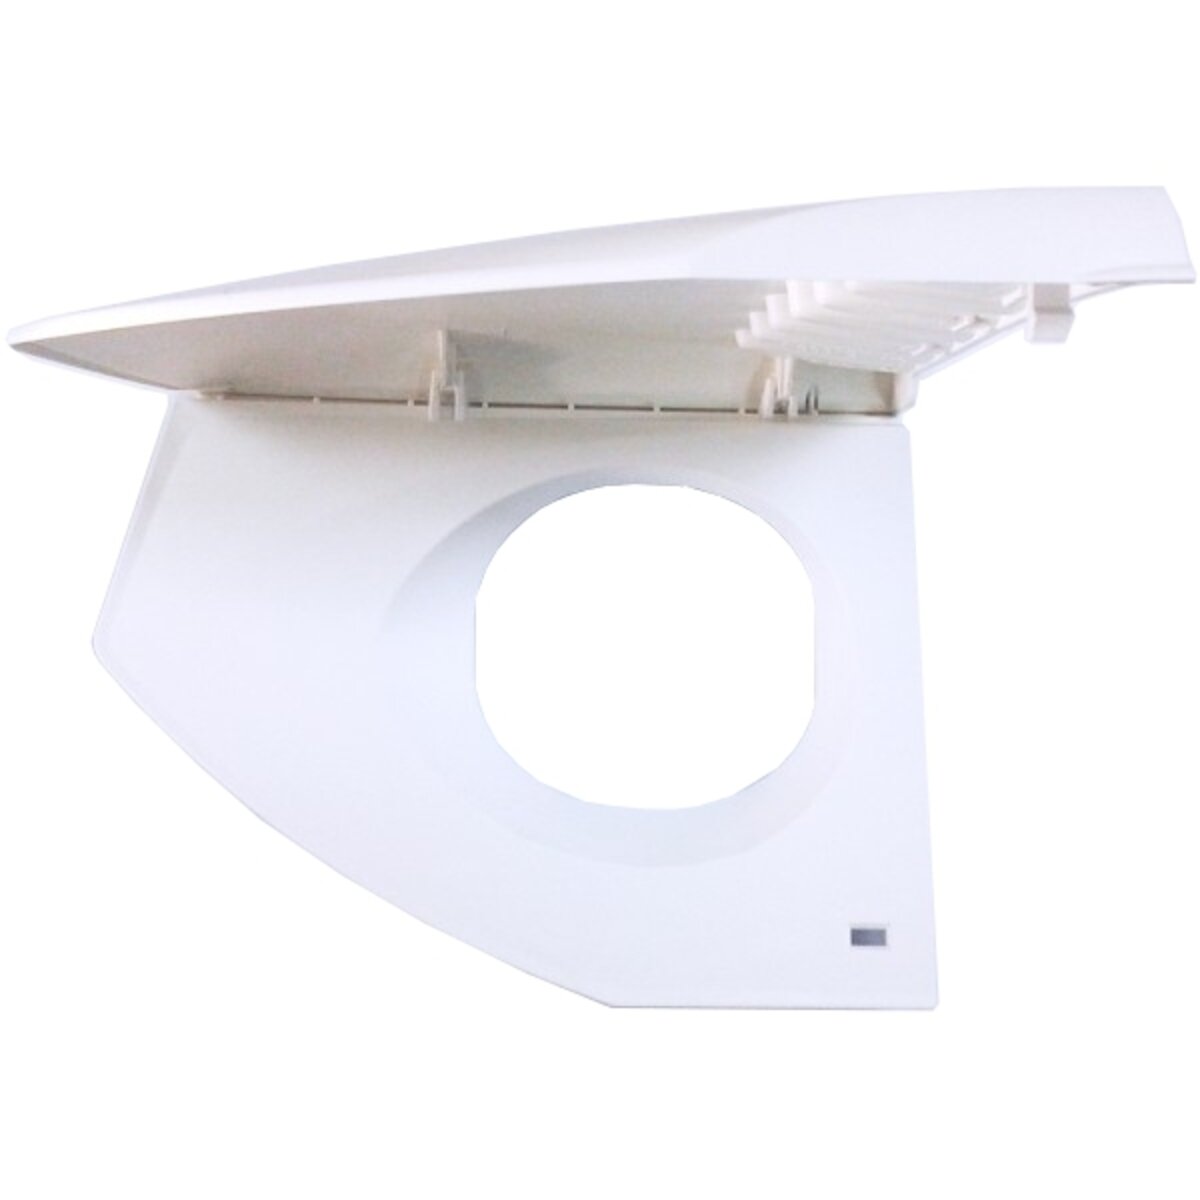 Left side support for control a with cover - for Carrier 42n fan coil unit